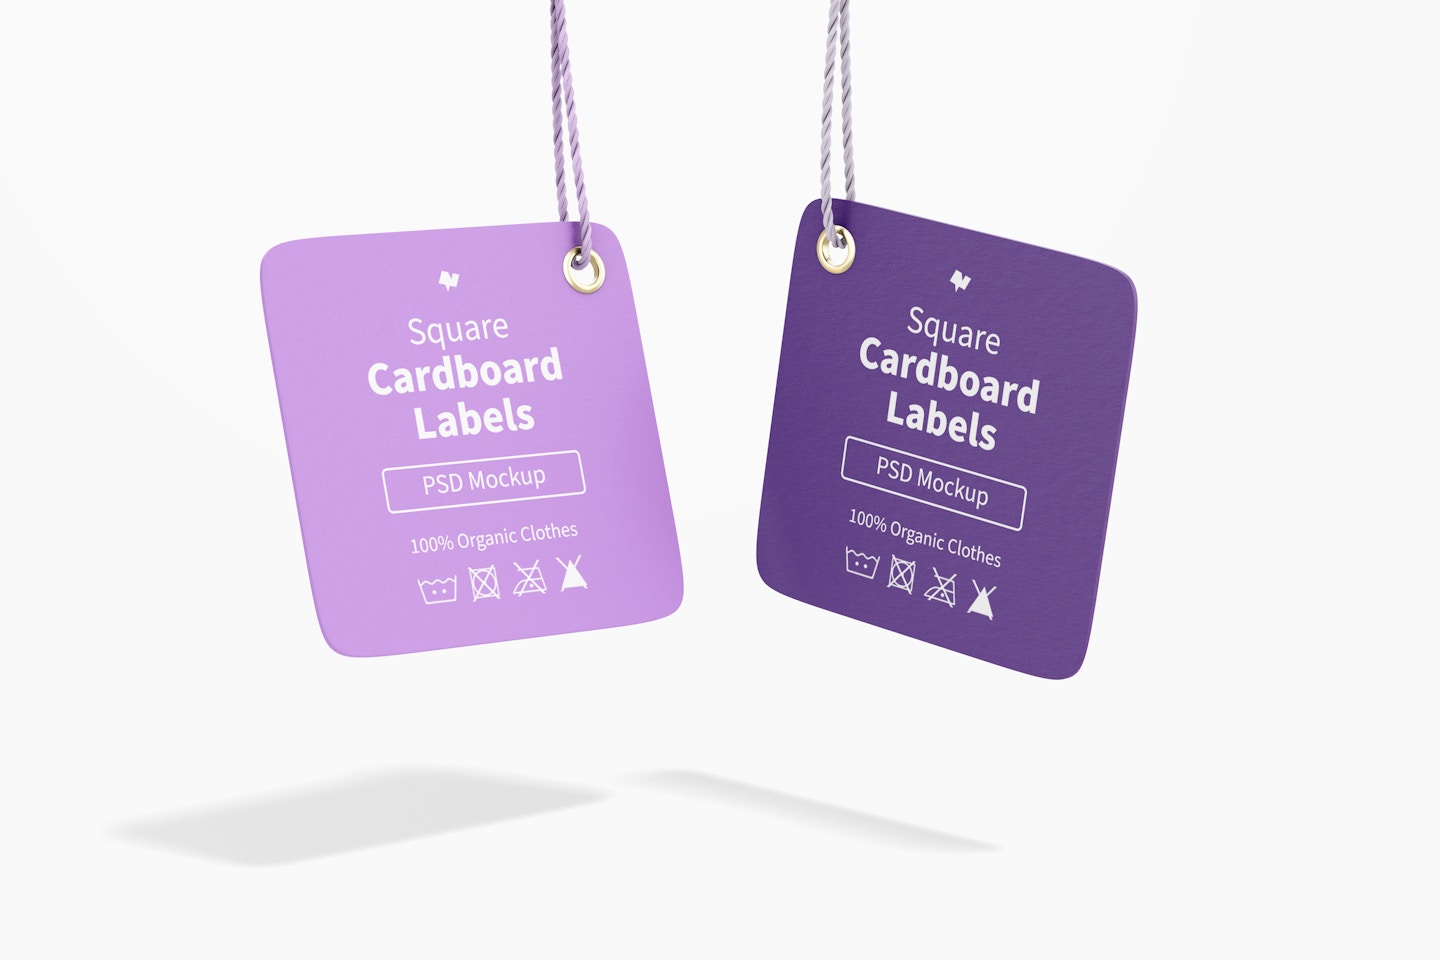 Square Cardboard Labels with Rope Mockup